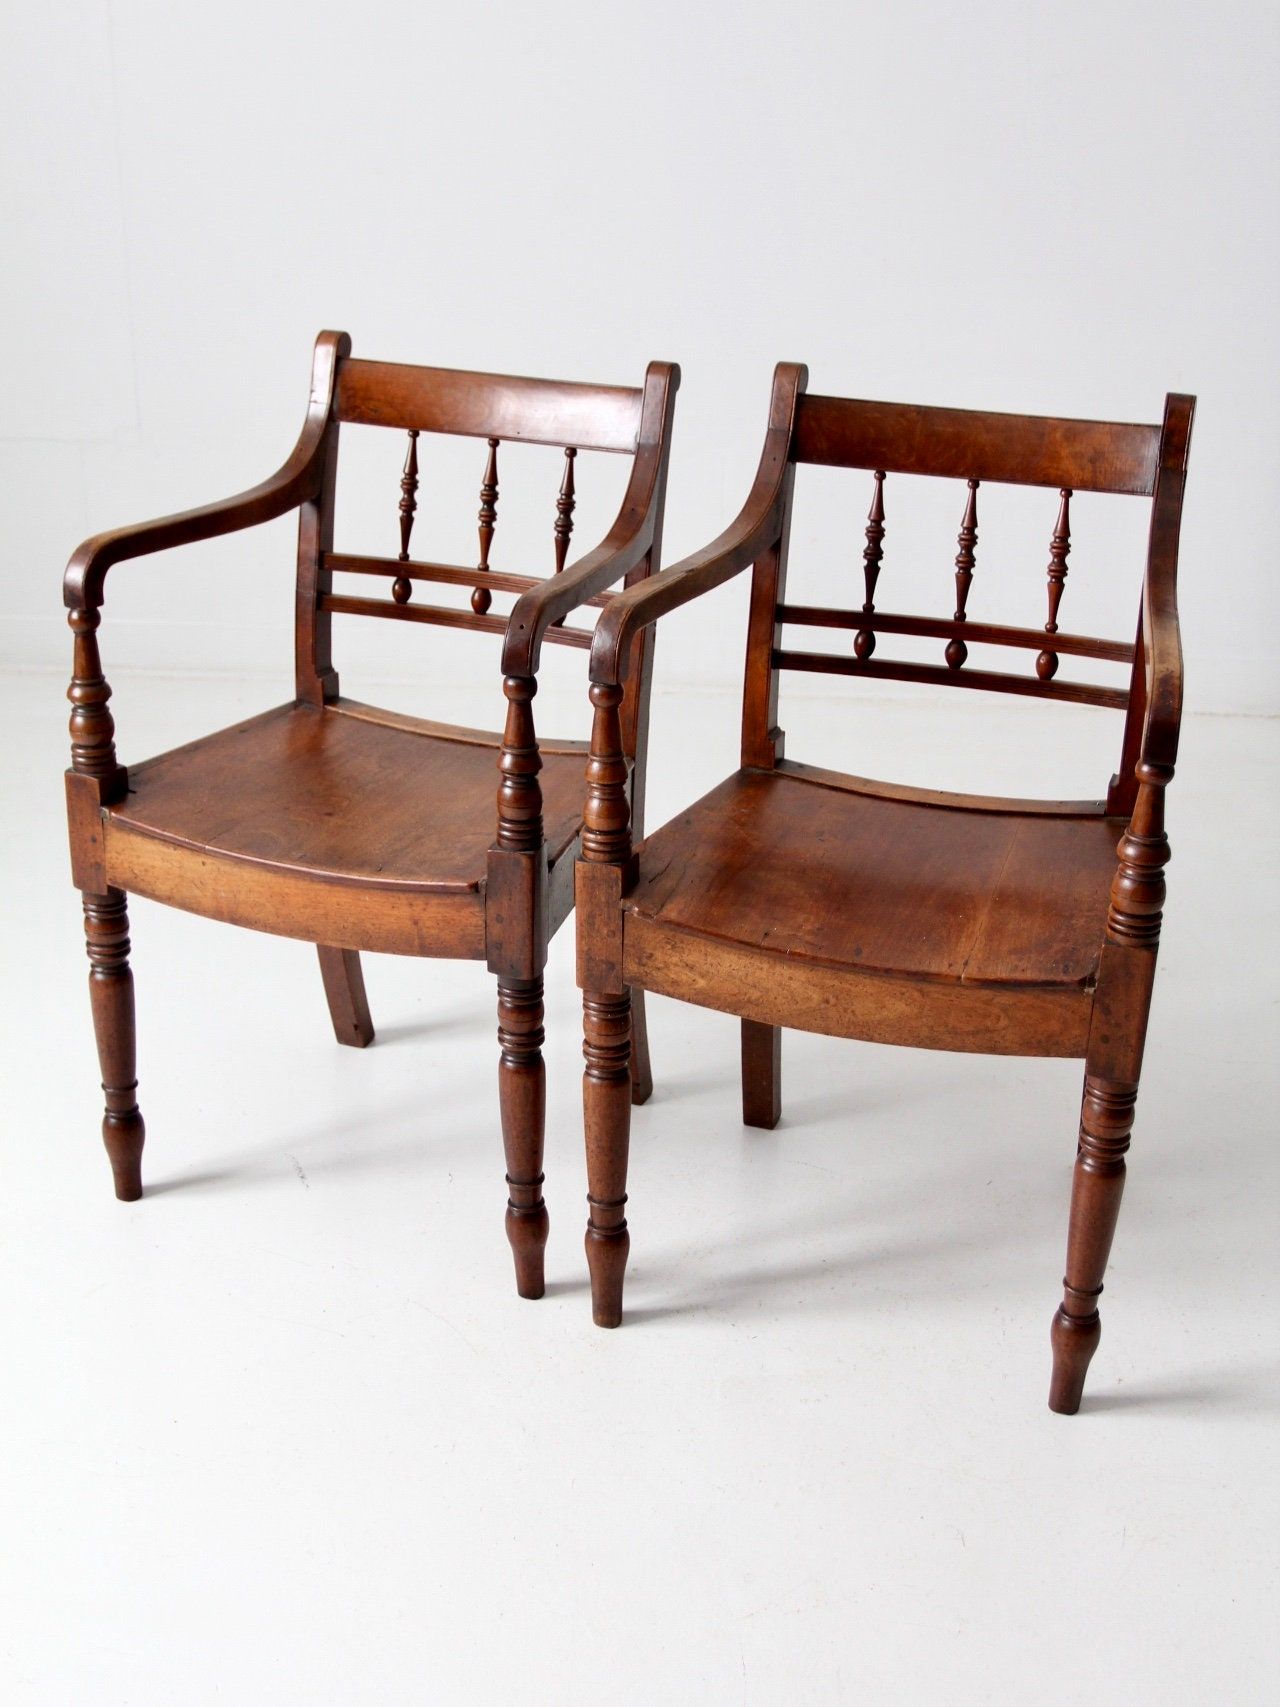 Timeless Elegance: The Charm of Antique Wooden Chairs With Arms